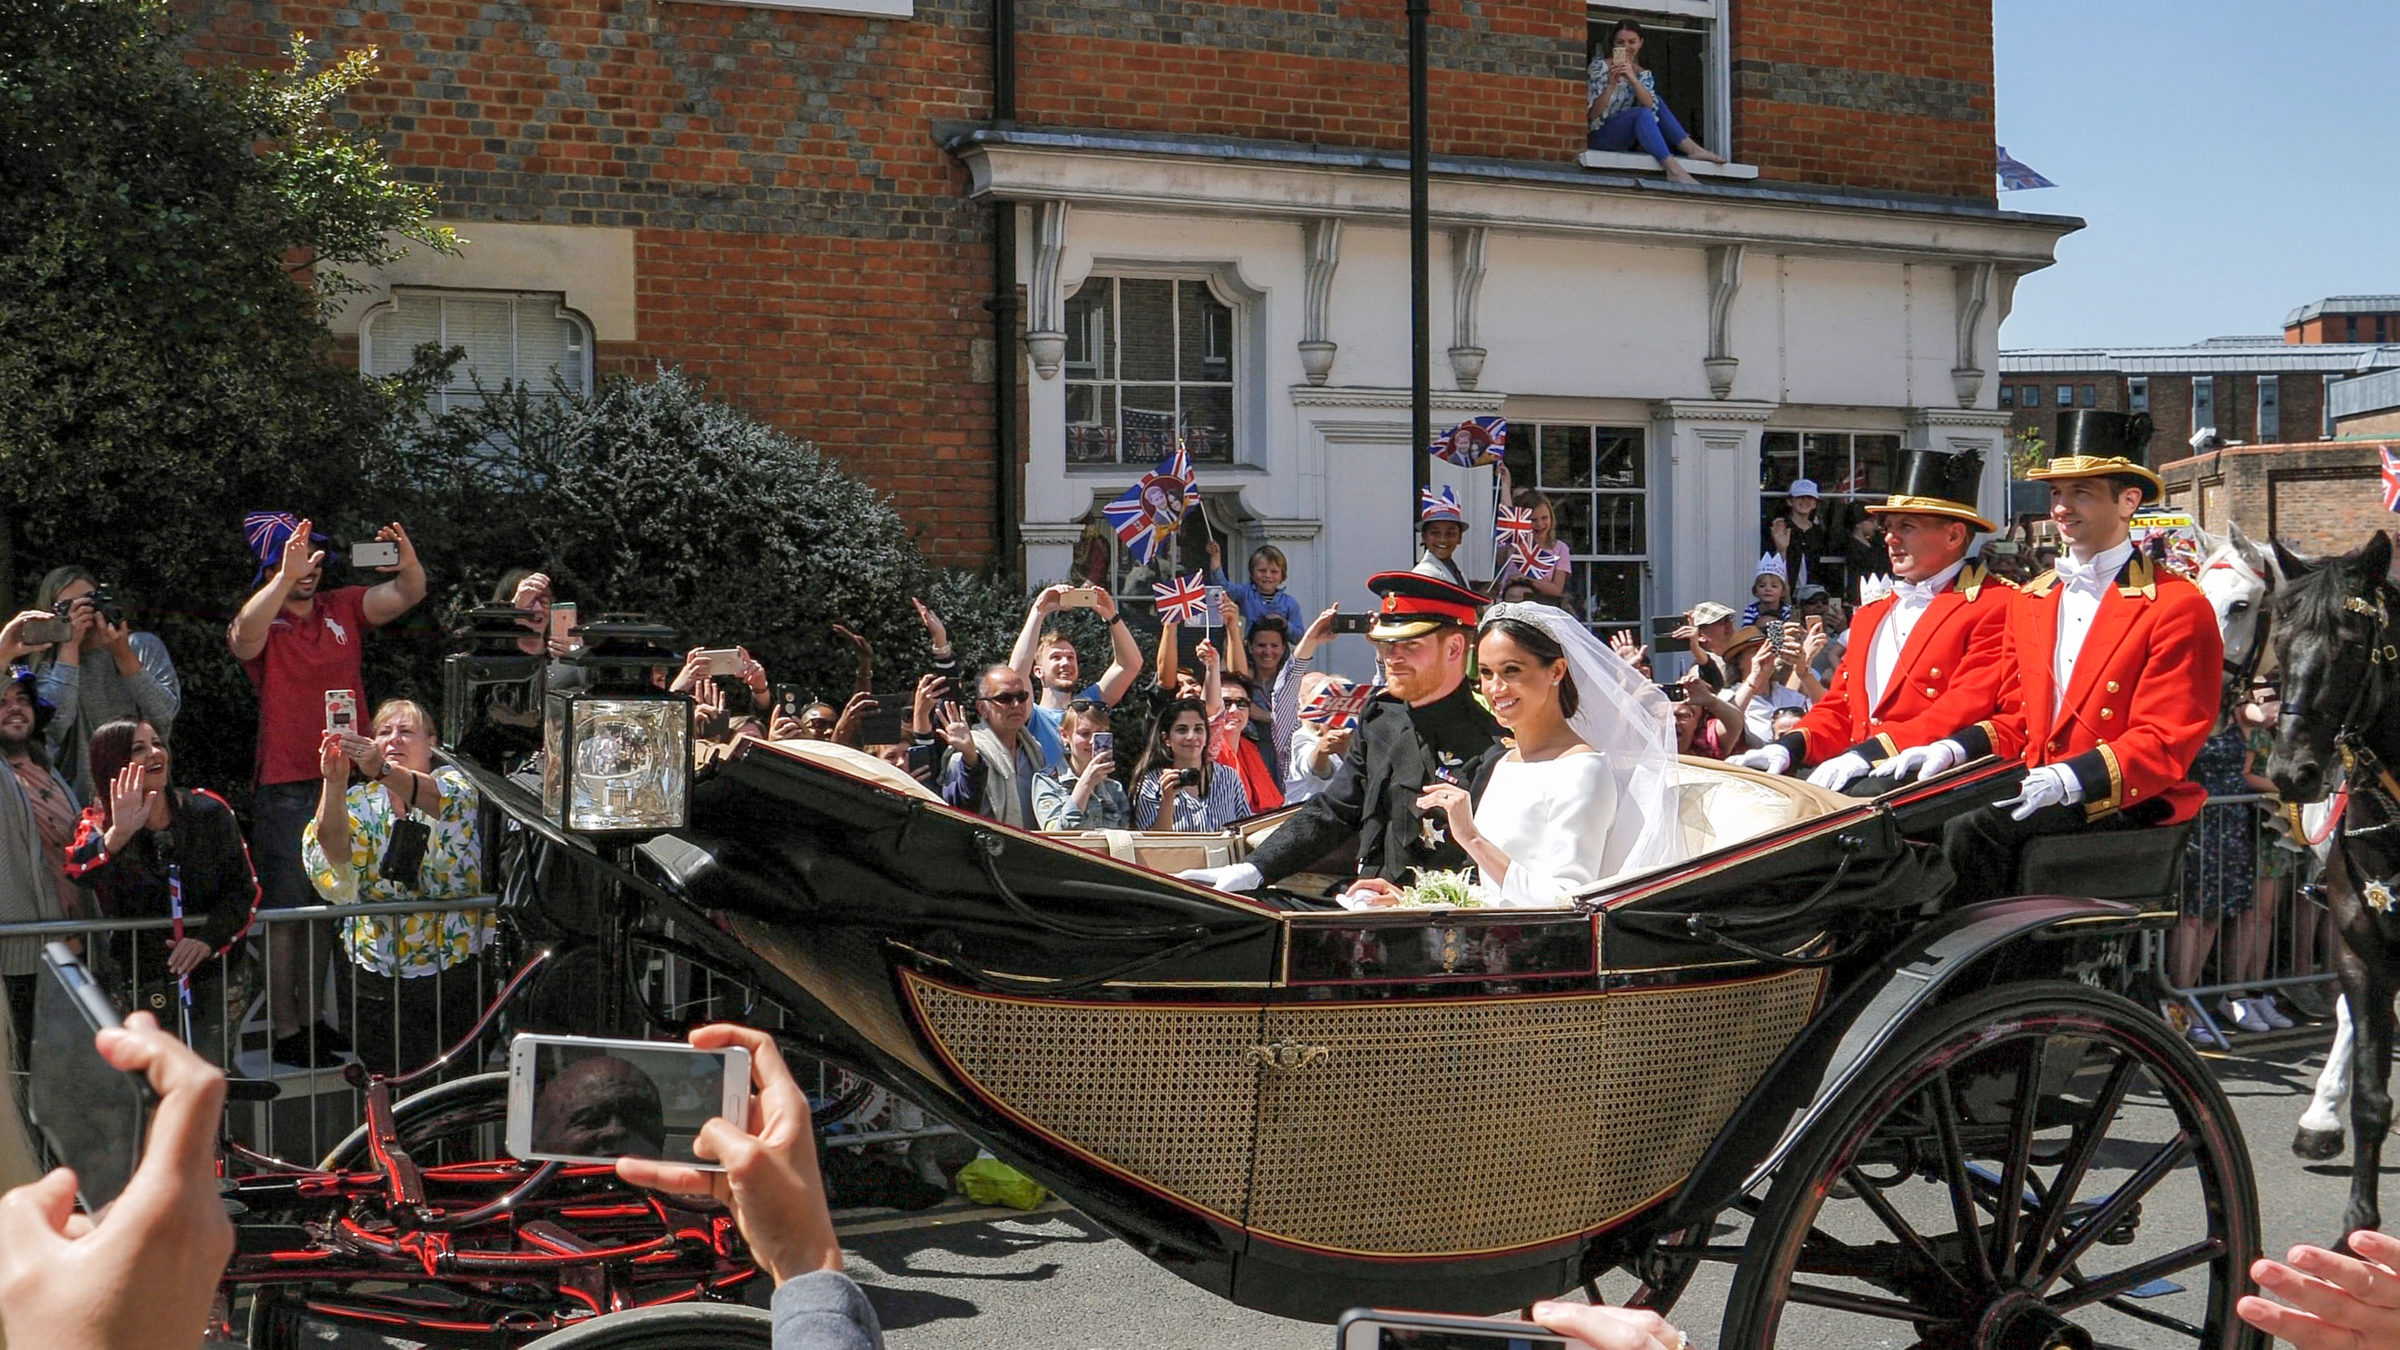 Prince Harry and Meghan Markle greet fans in carriage following royal weddings 